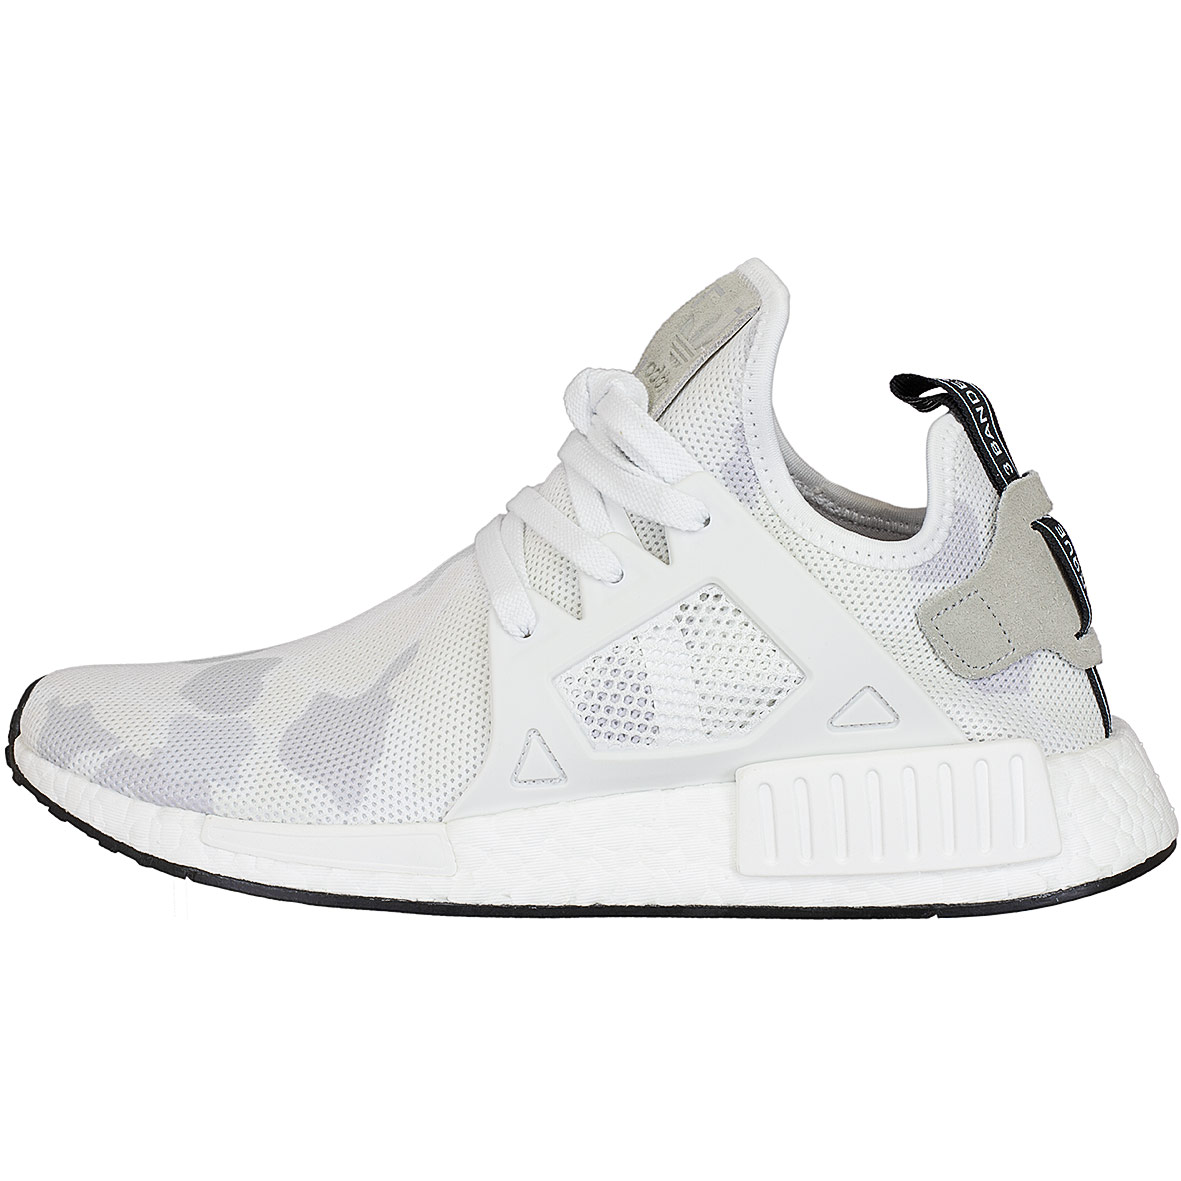 NMD XR1 in Duck Camo Adidas nmd r1 pin.Pinterest